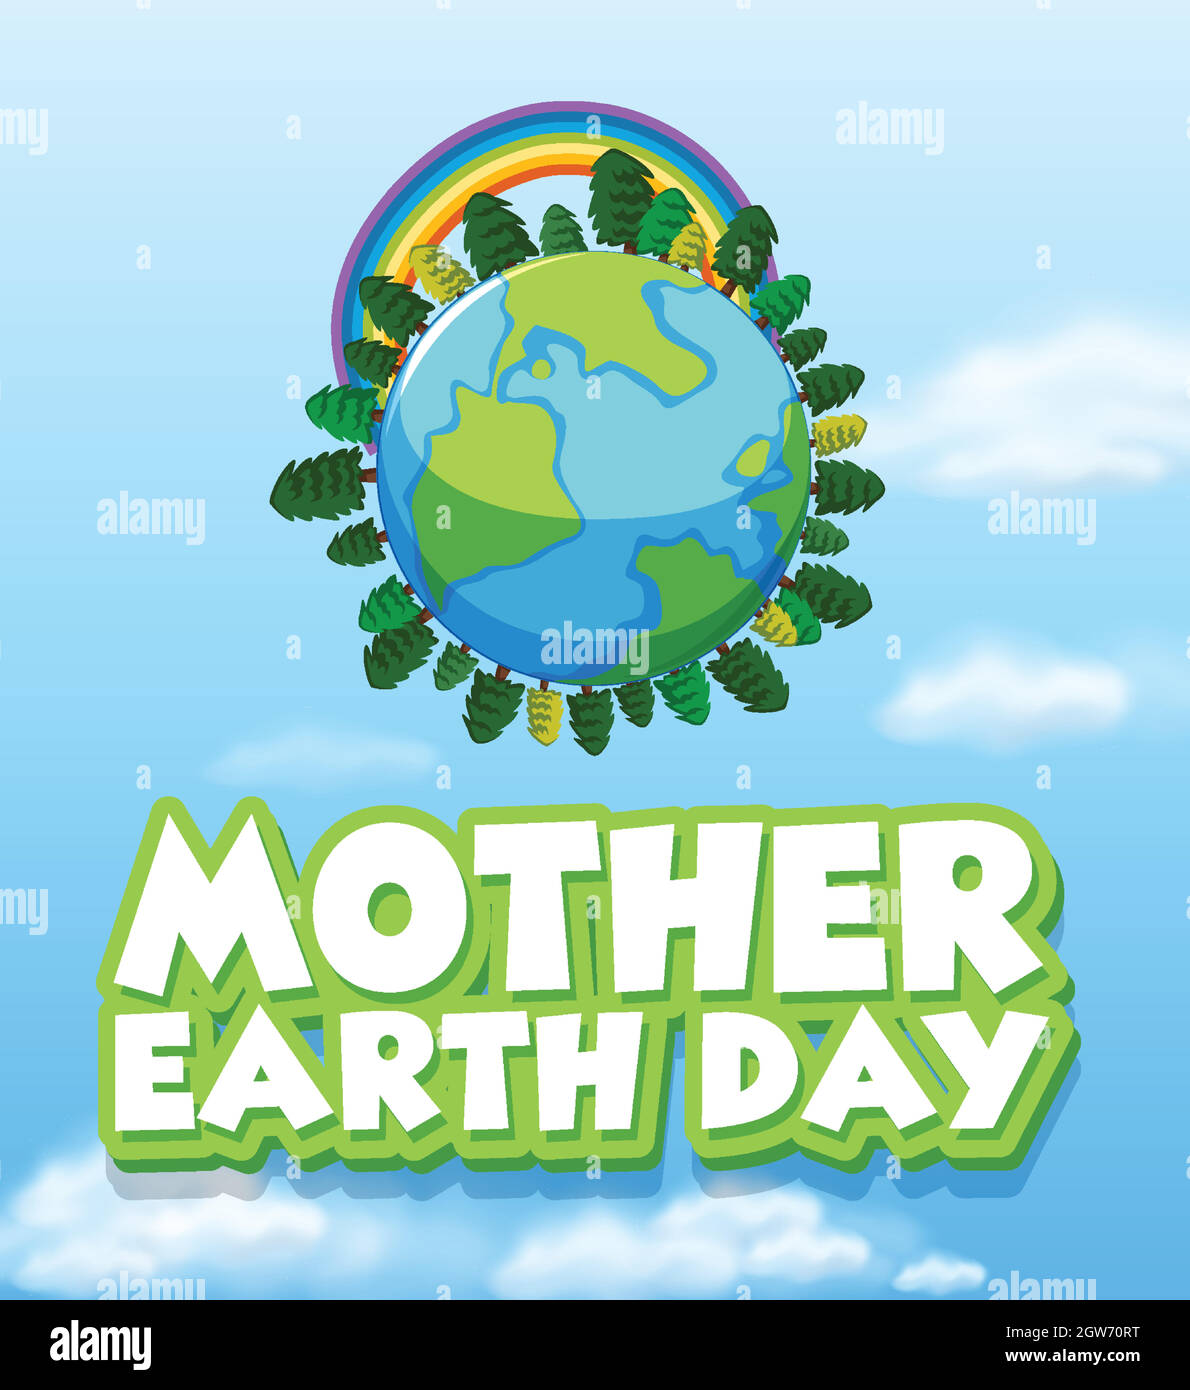 https://c8.alamy.com/comp/2GW70RT/poster-design-for-mother-earth-day-with-many-trees-on-earth-2GW70RT.jpg